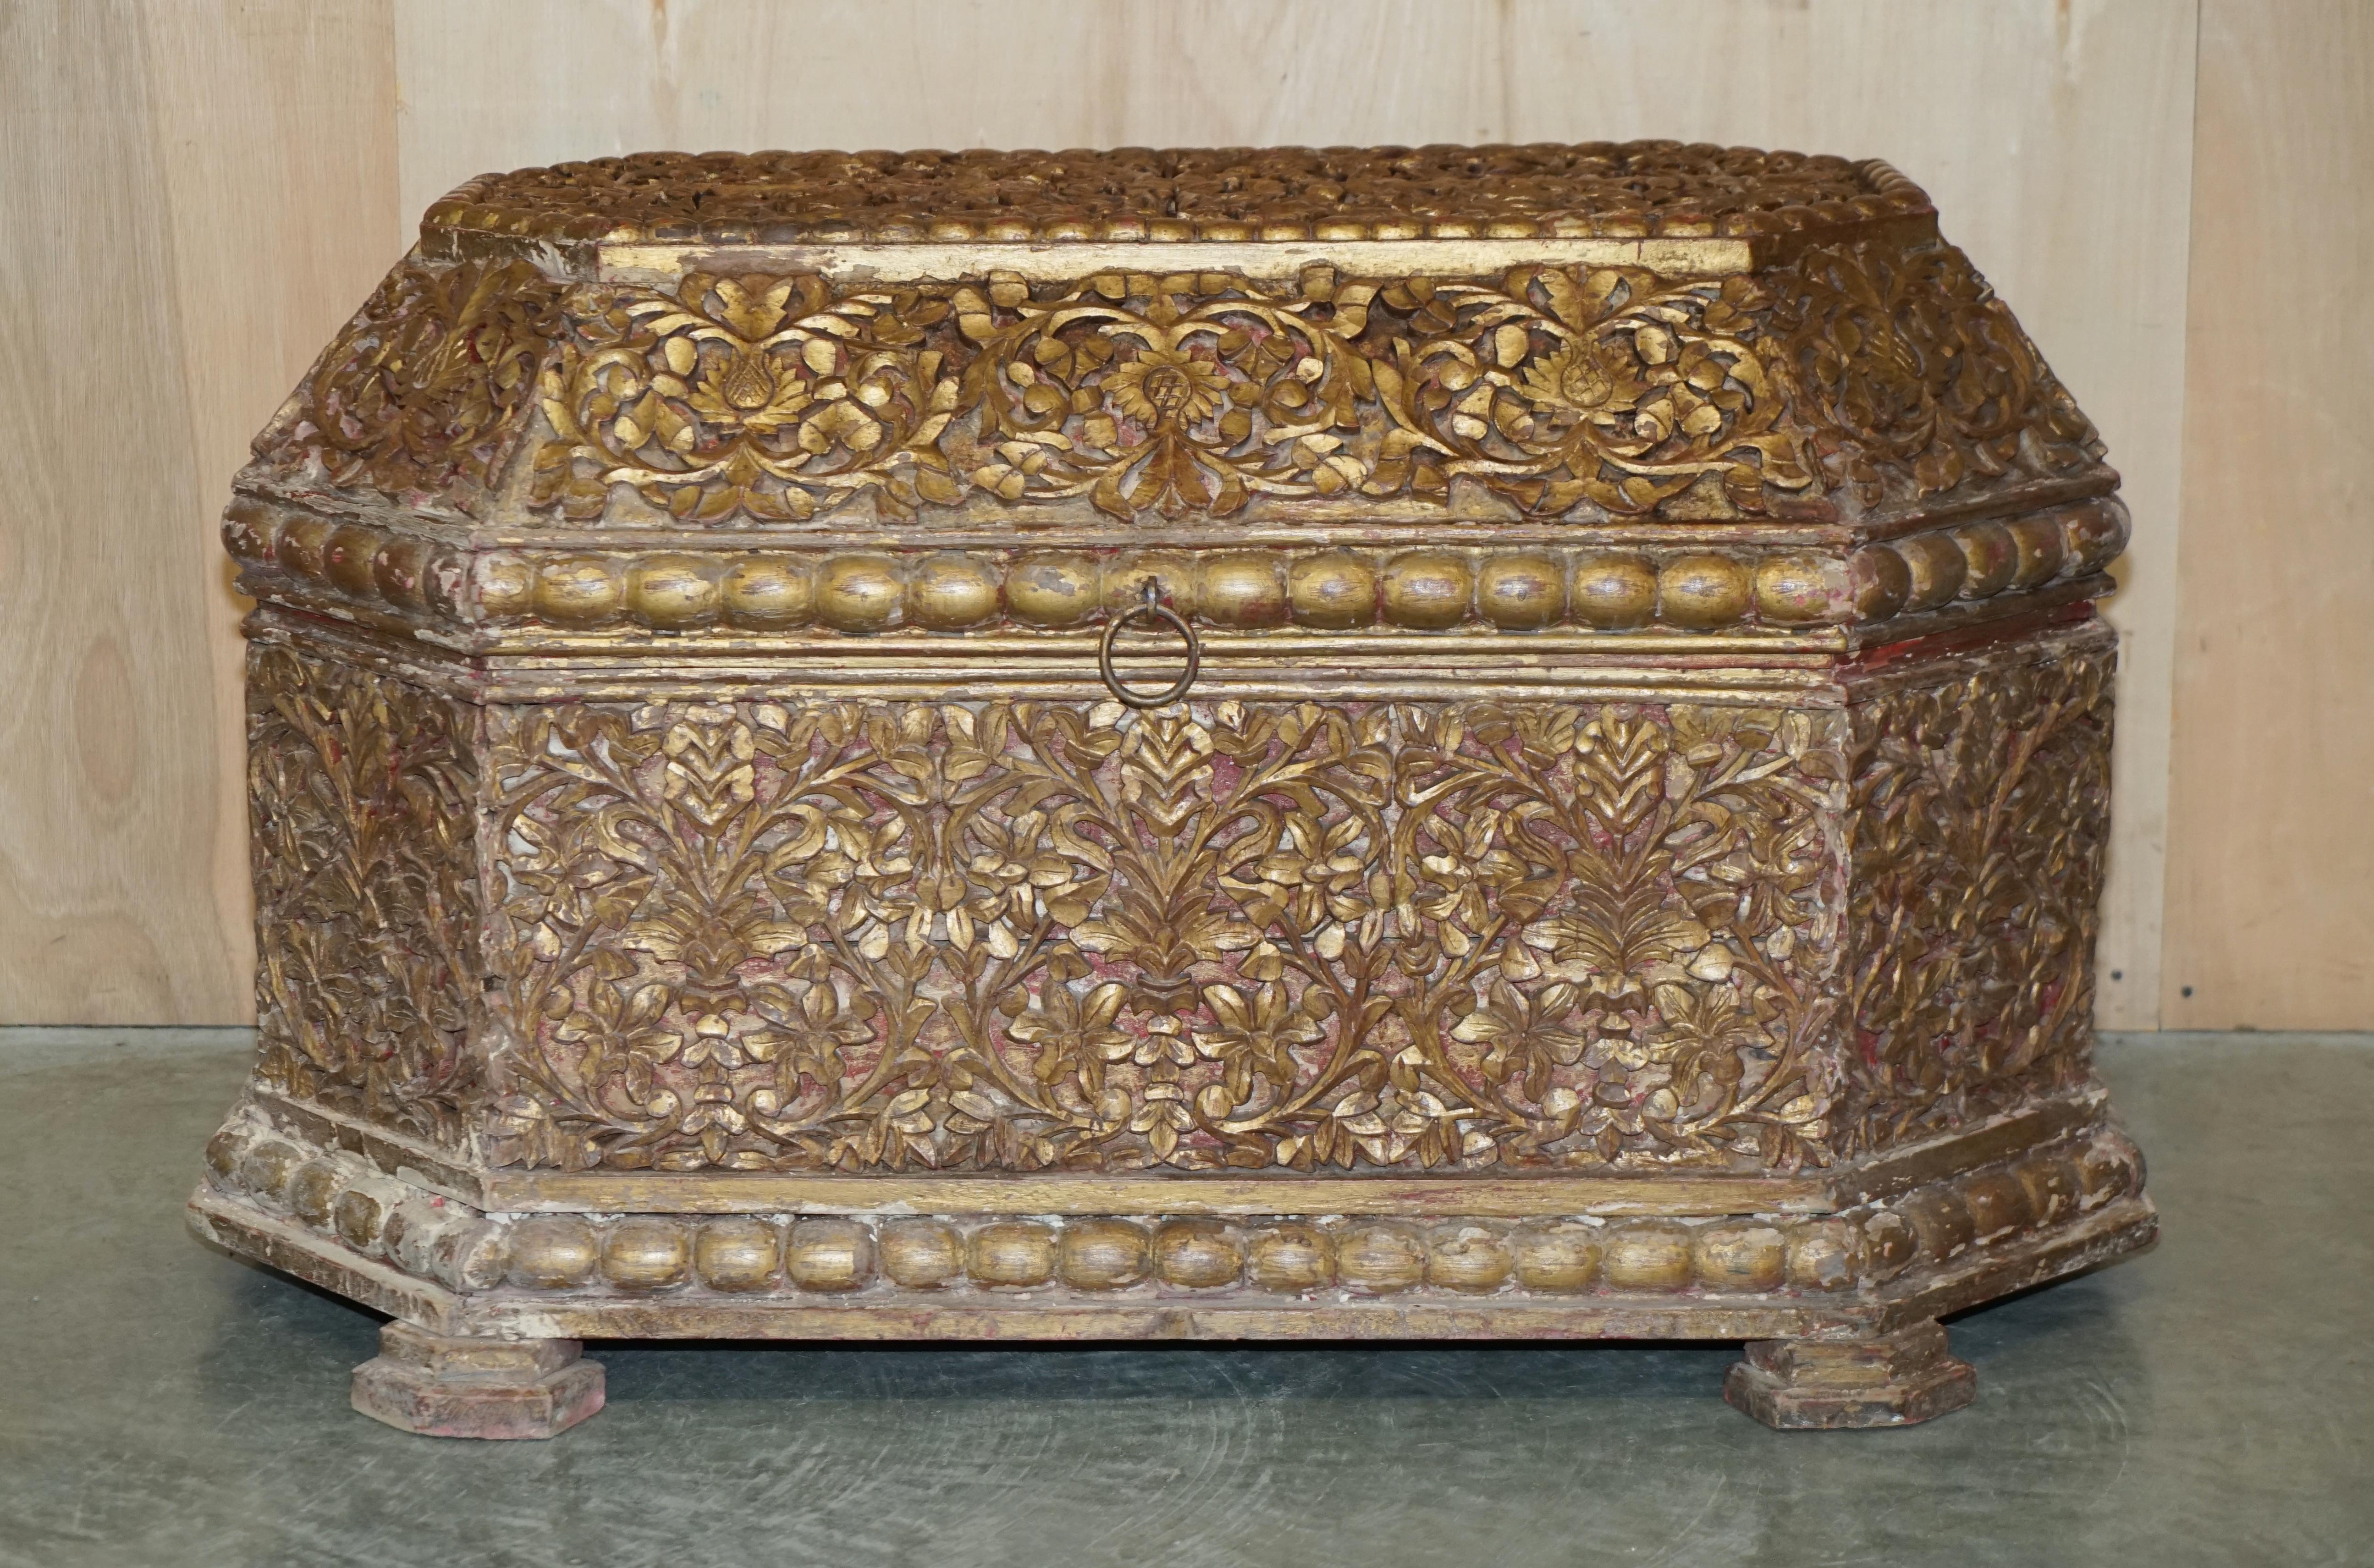 Royal House Antiques

Royal House Antiques is delighted to offer for sale this lovely original circa 1780 hand carved and painted Indian linen trunk or chest 

A very good looking and well made piece, it is very ornately carved all over and has